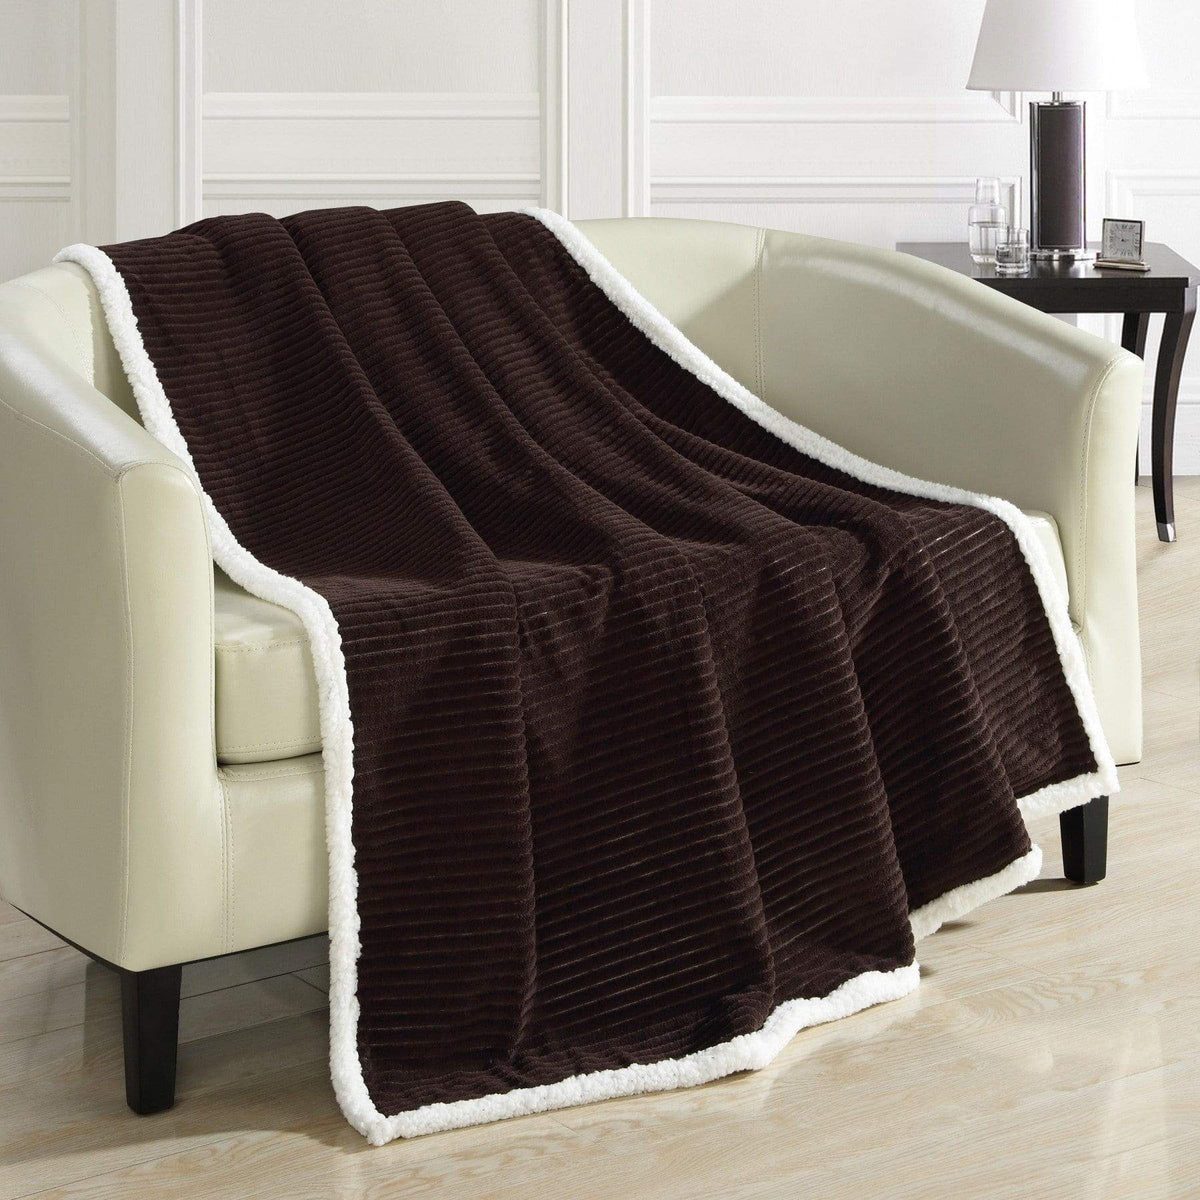 Chic Home Bern Micro Mink Sherpa Lined Throw Blanket Brown